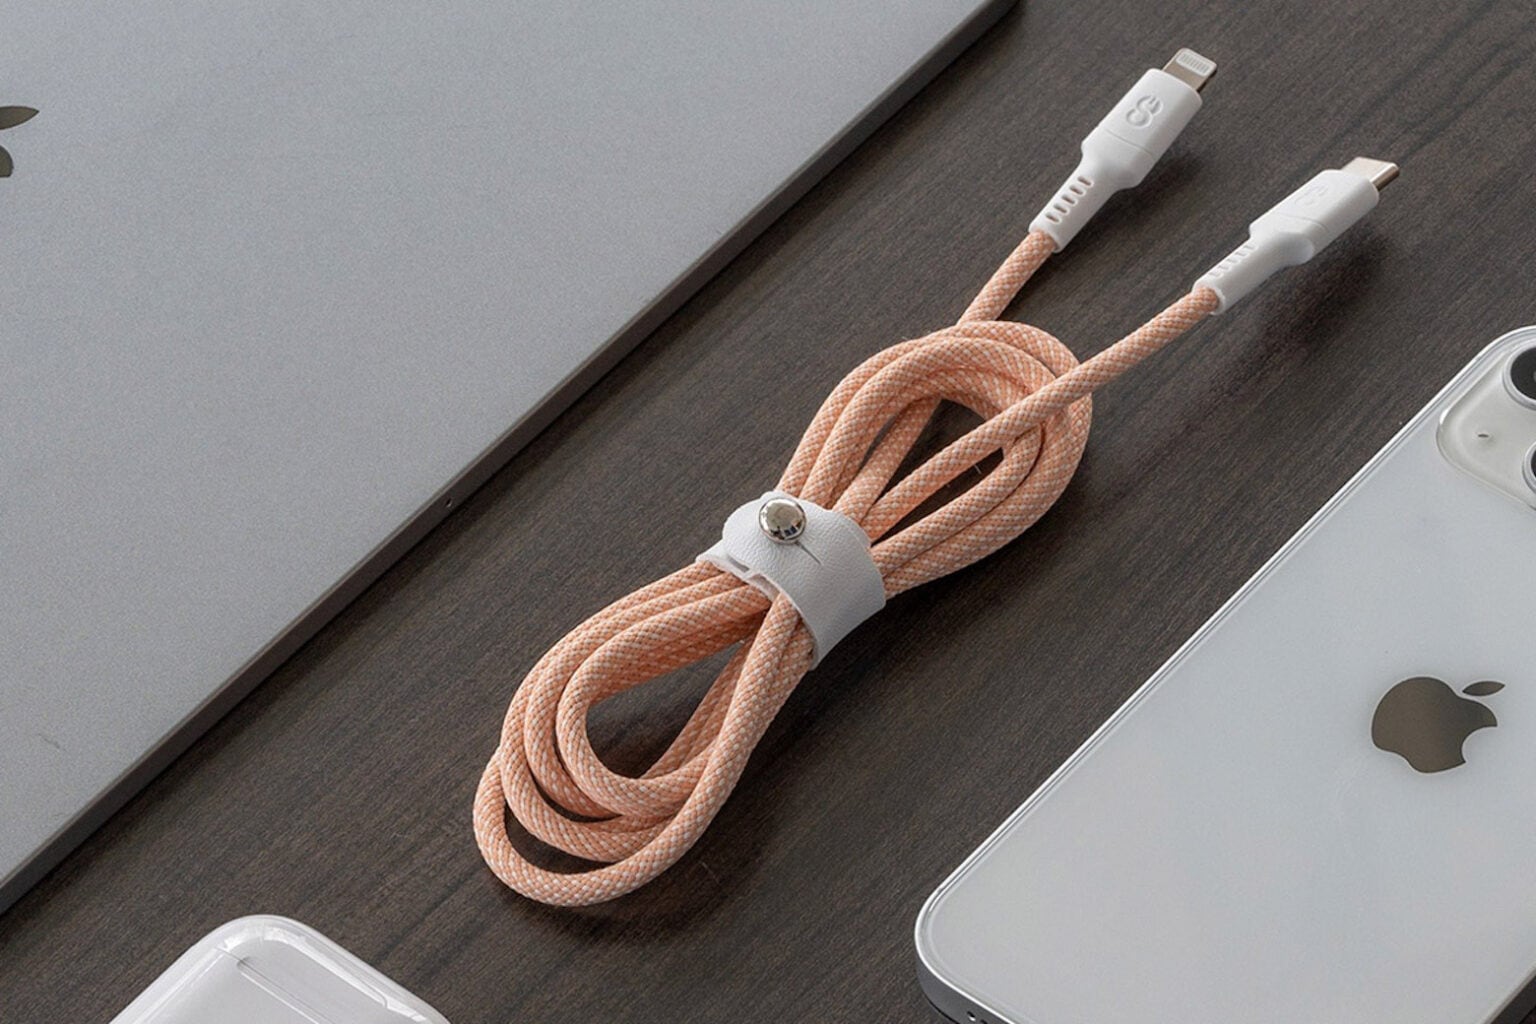 This MFI-certified Lightning cable combines speed, durability and style.